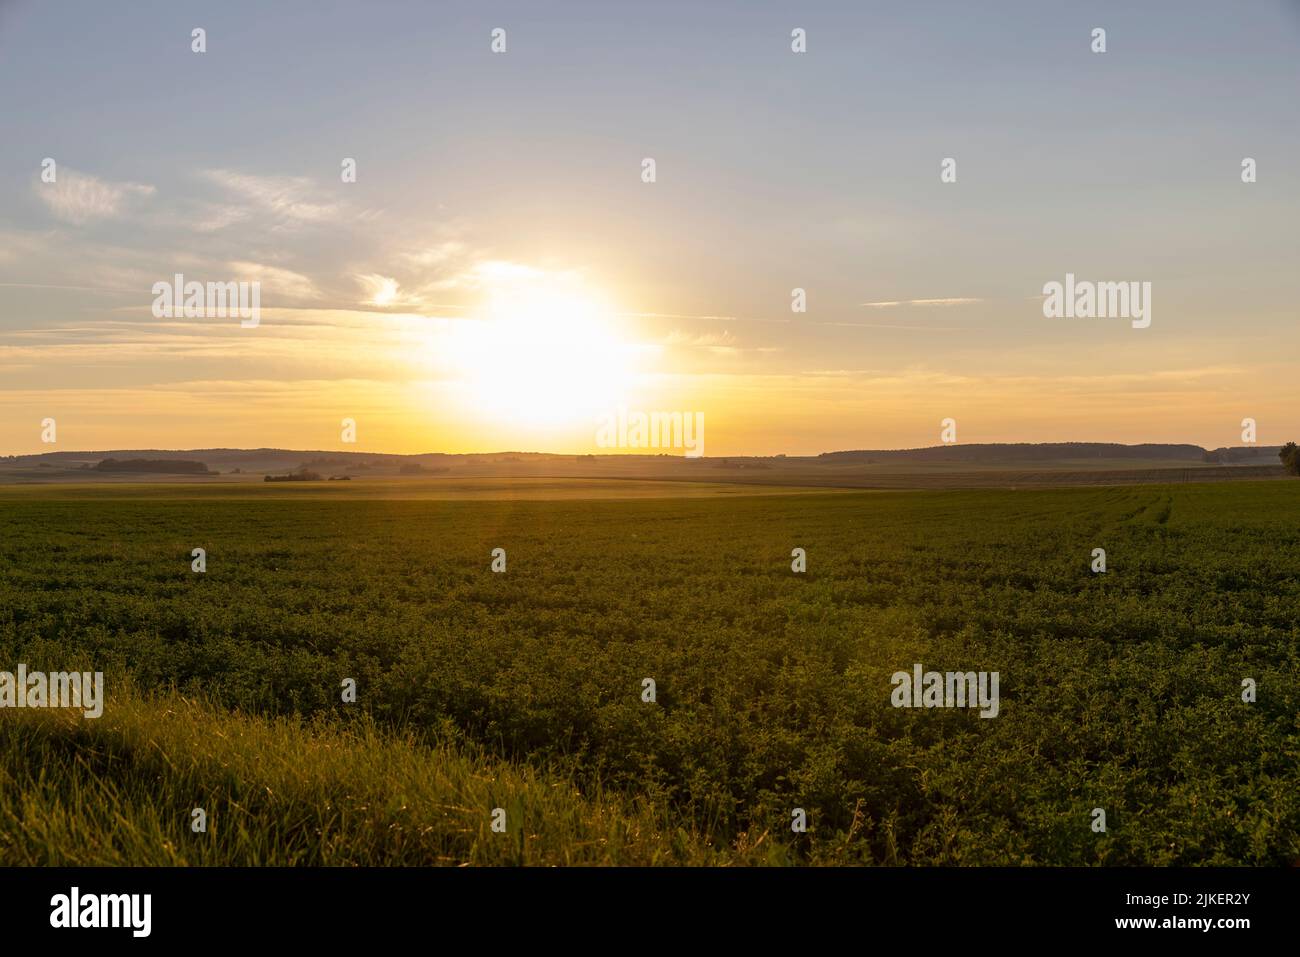 Ripe agricultural field at sunset, Vojvodina, Serbia stock photo